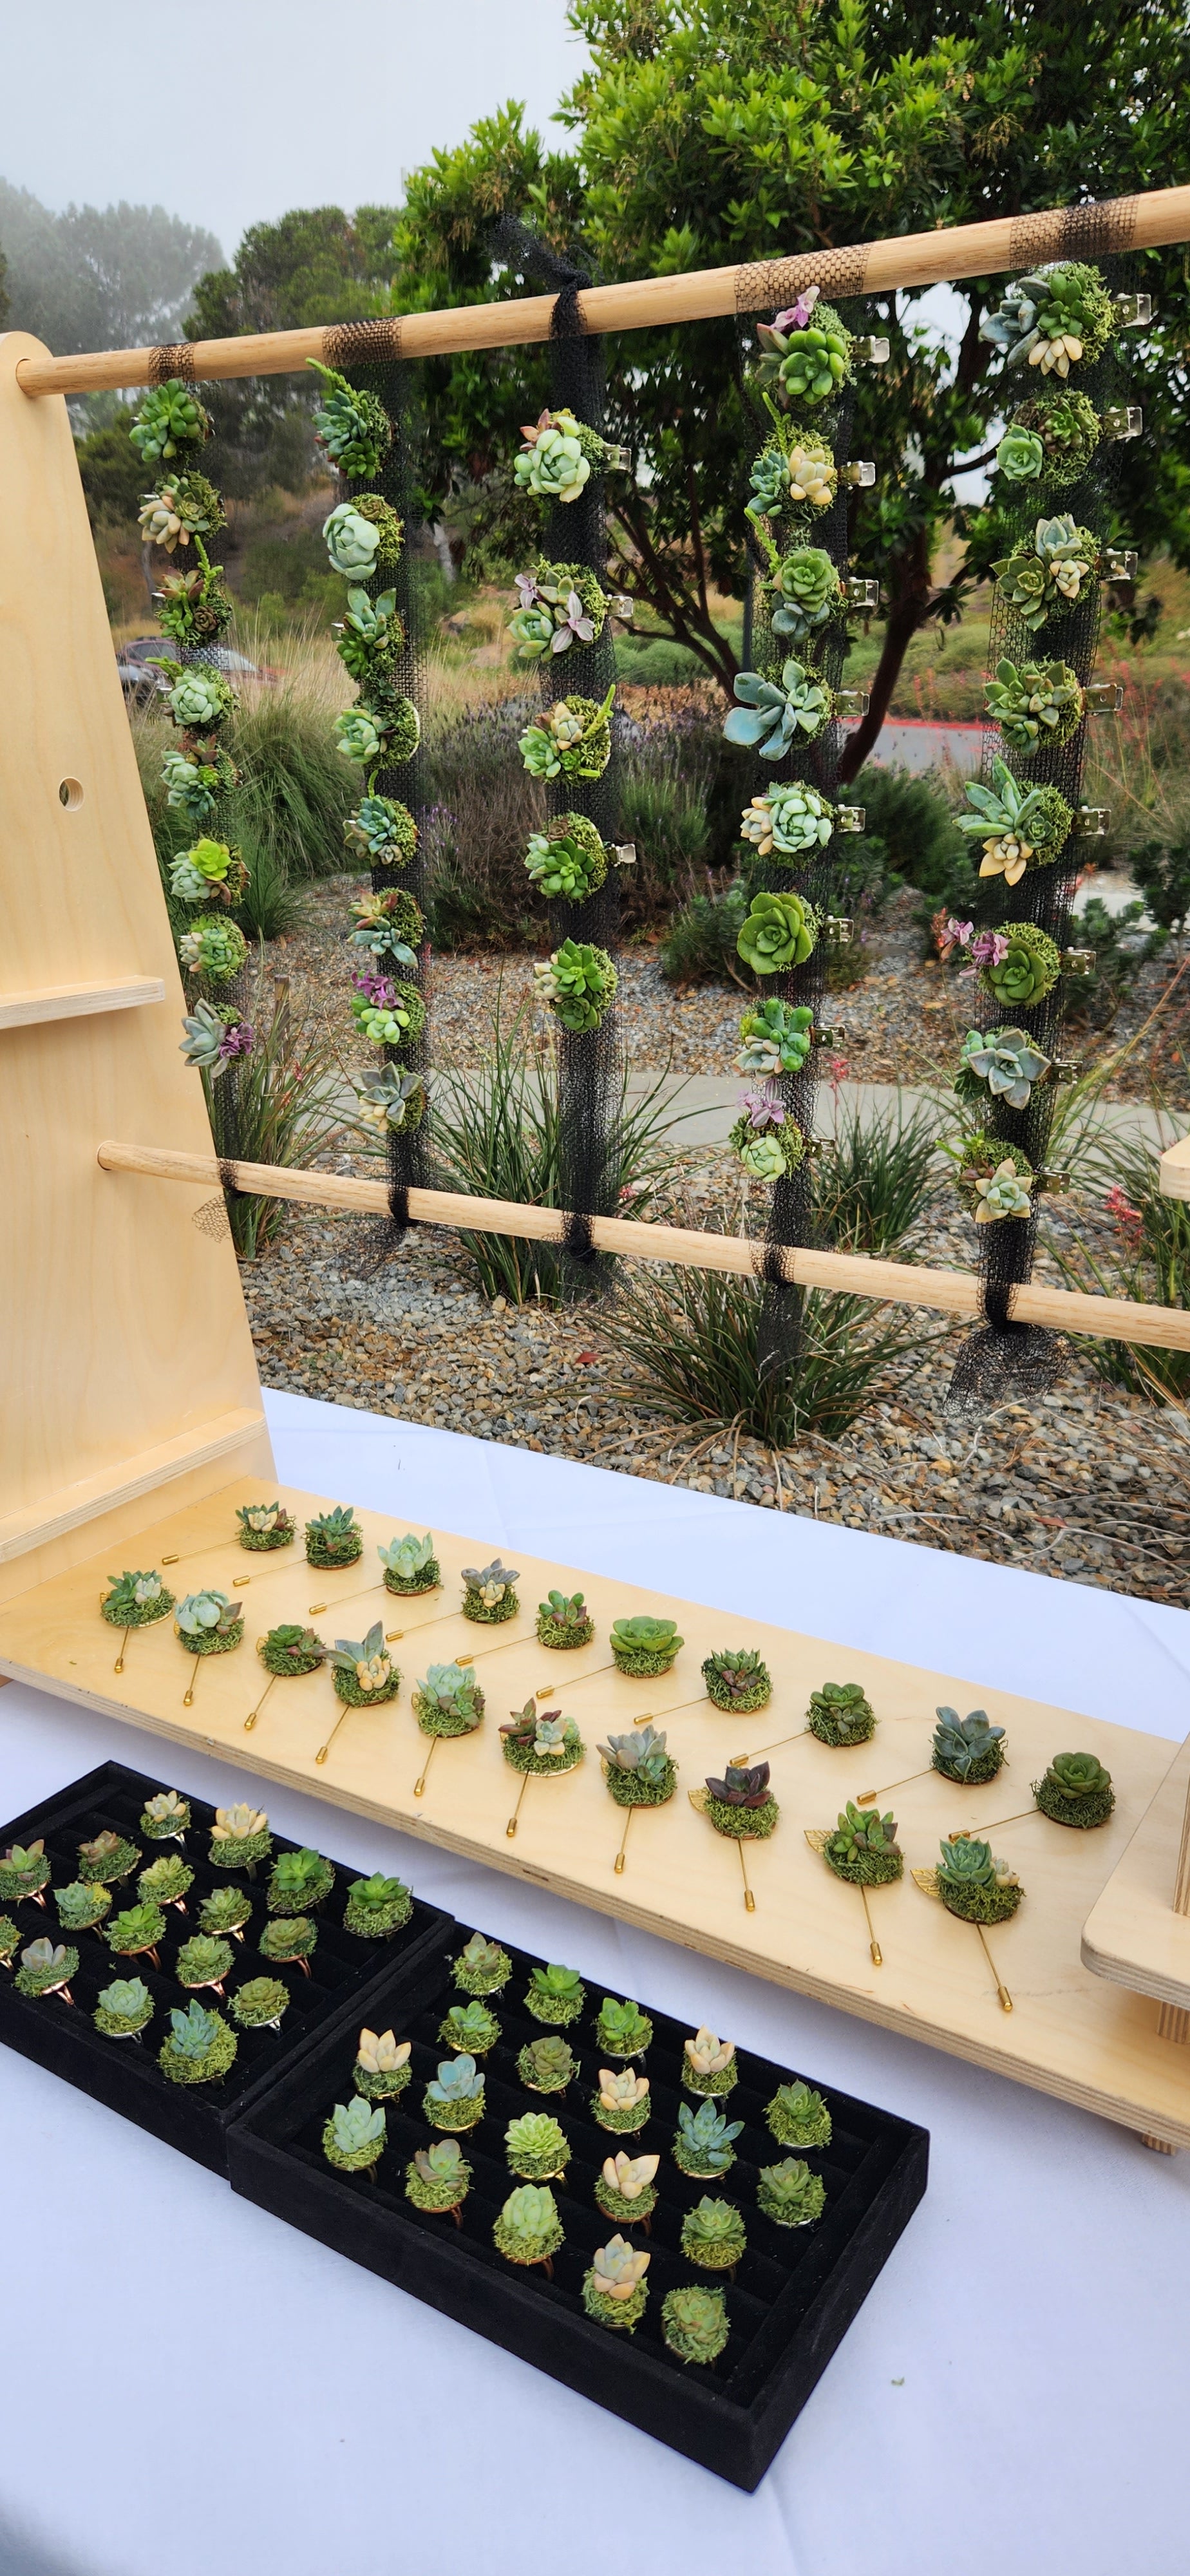 Sample Display of Succulent Hair Clips, Stick Pins, Rings